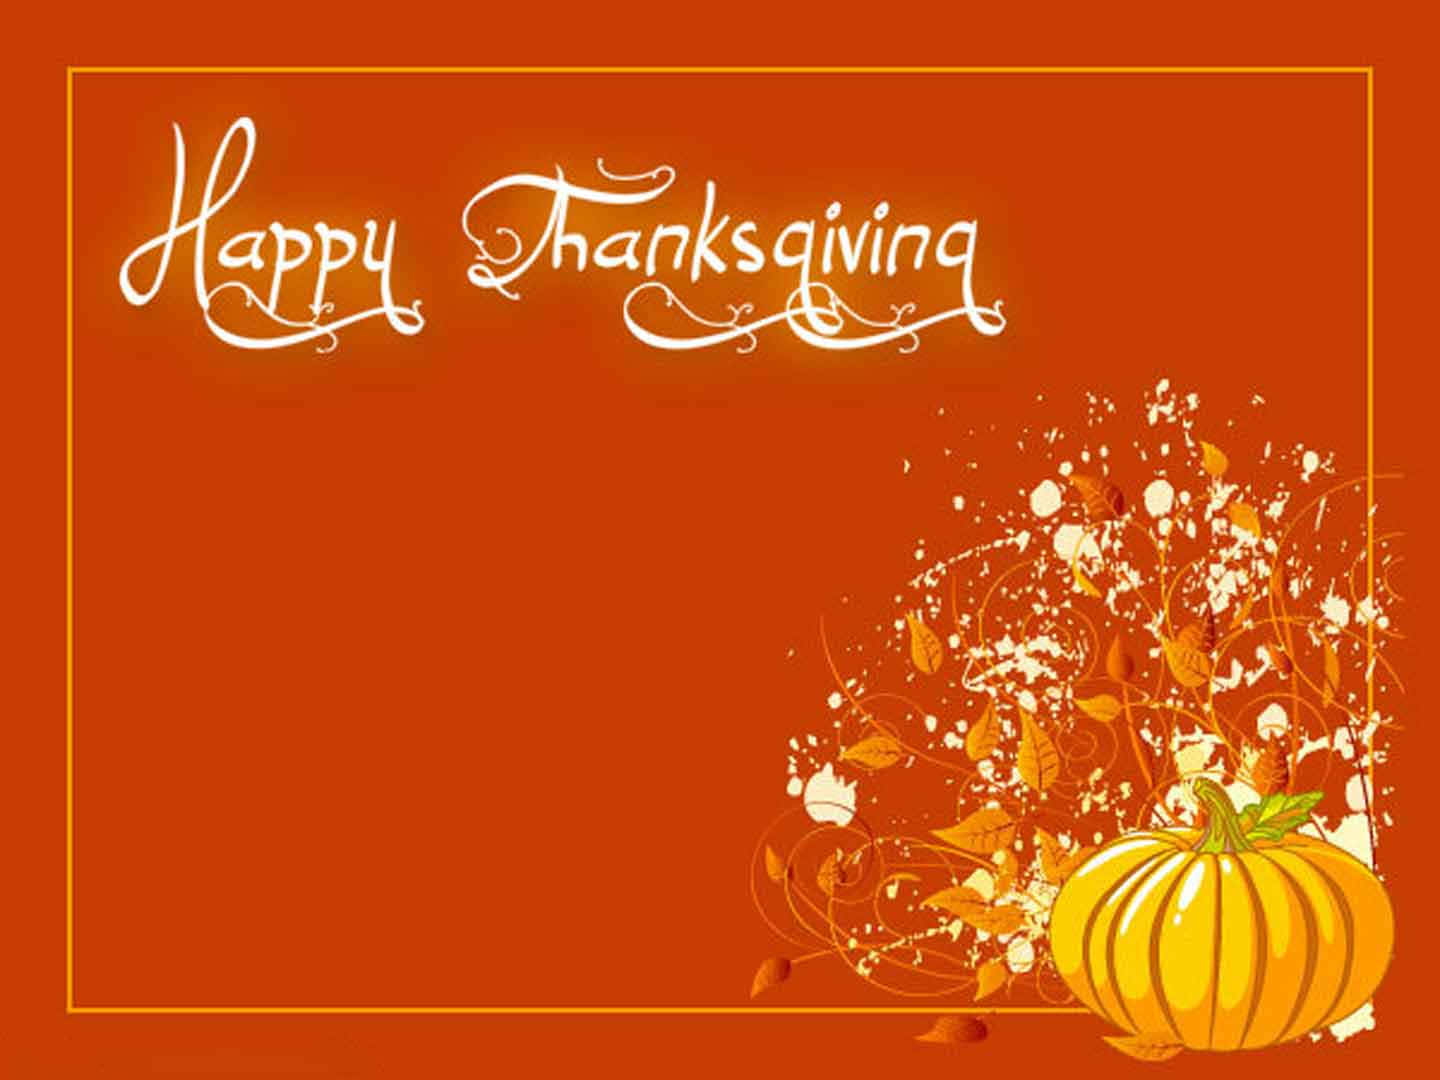 Magical Happy Thanksgiving Greeting Card With Pumpkin Background